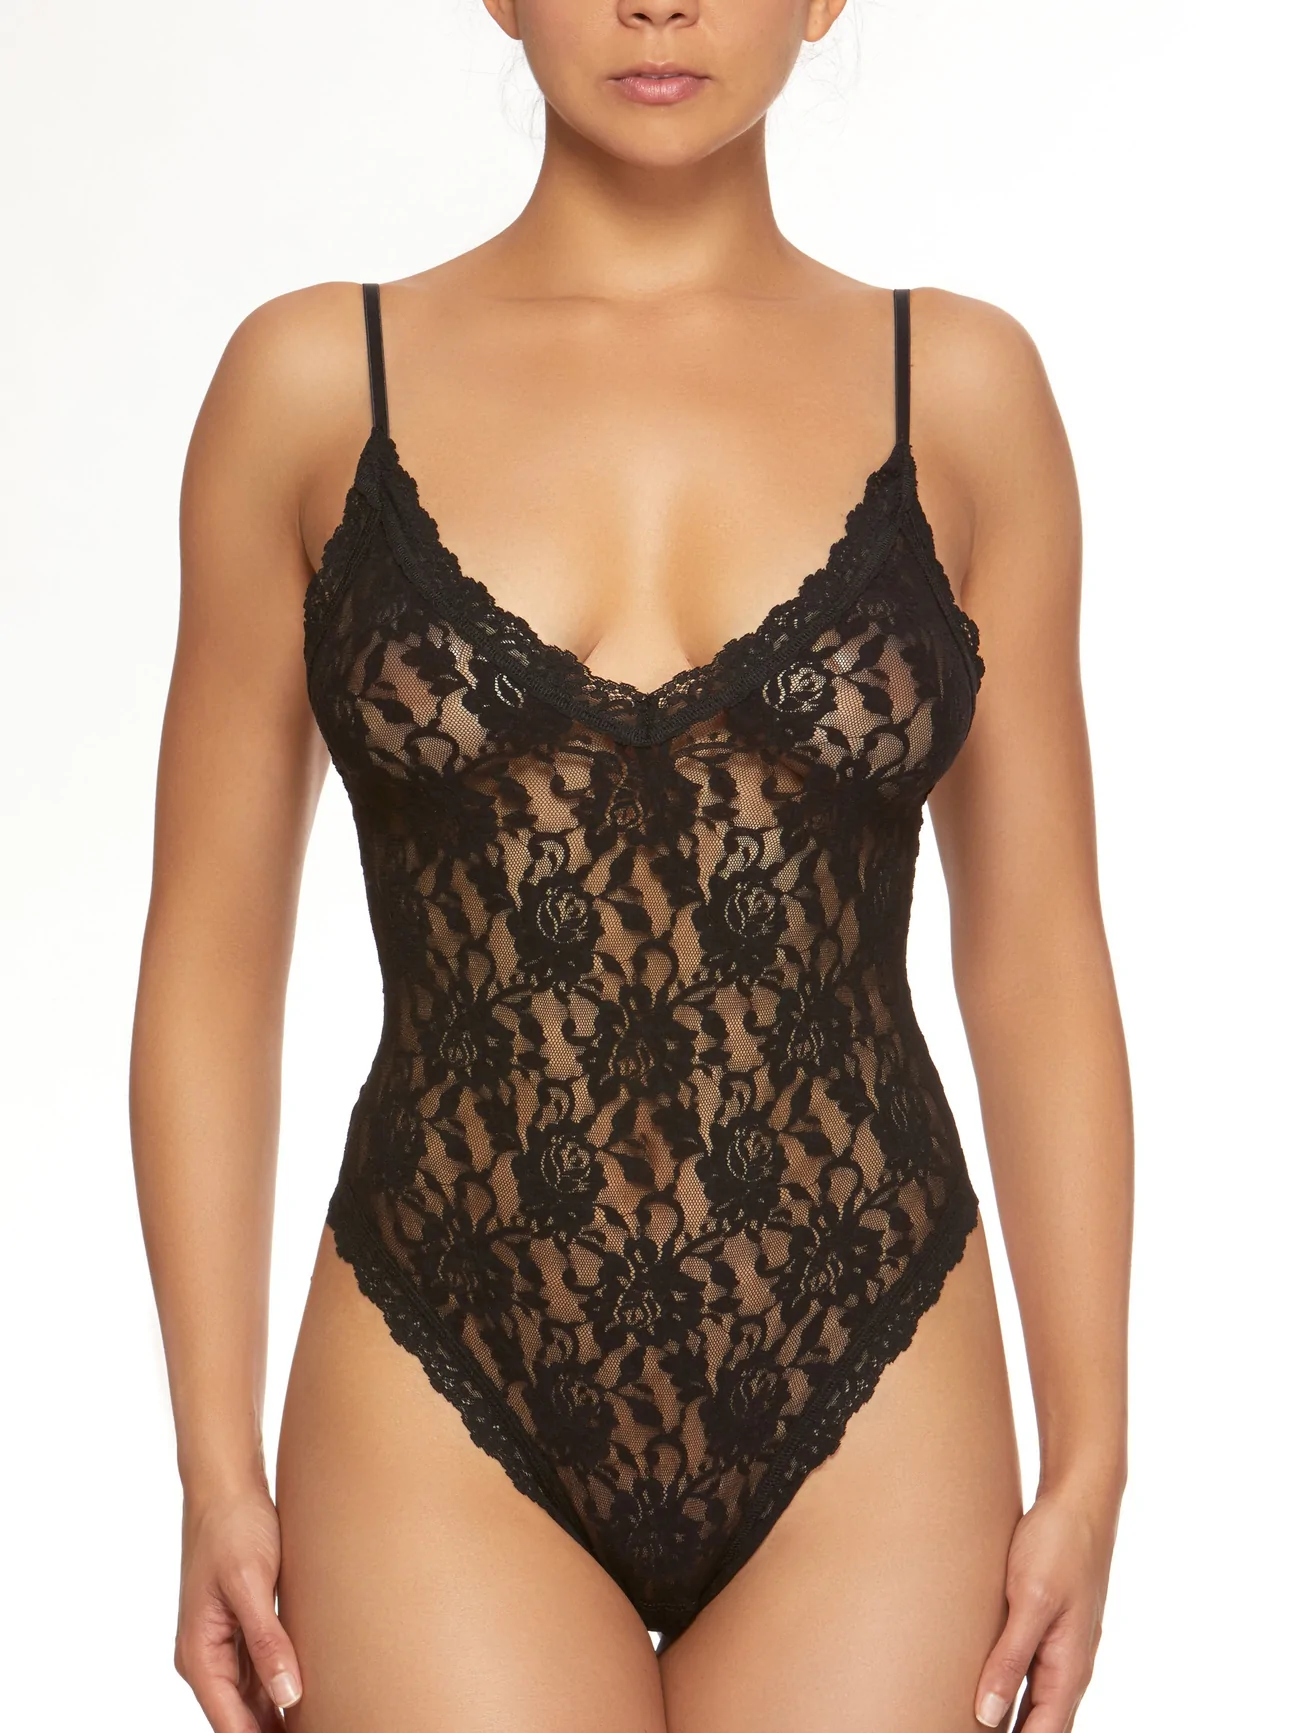 Something Lacy Lace Body